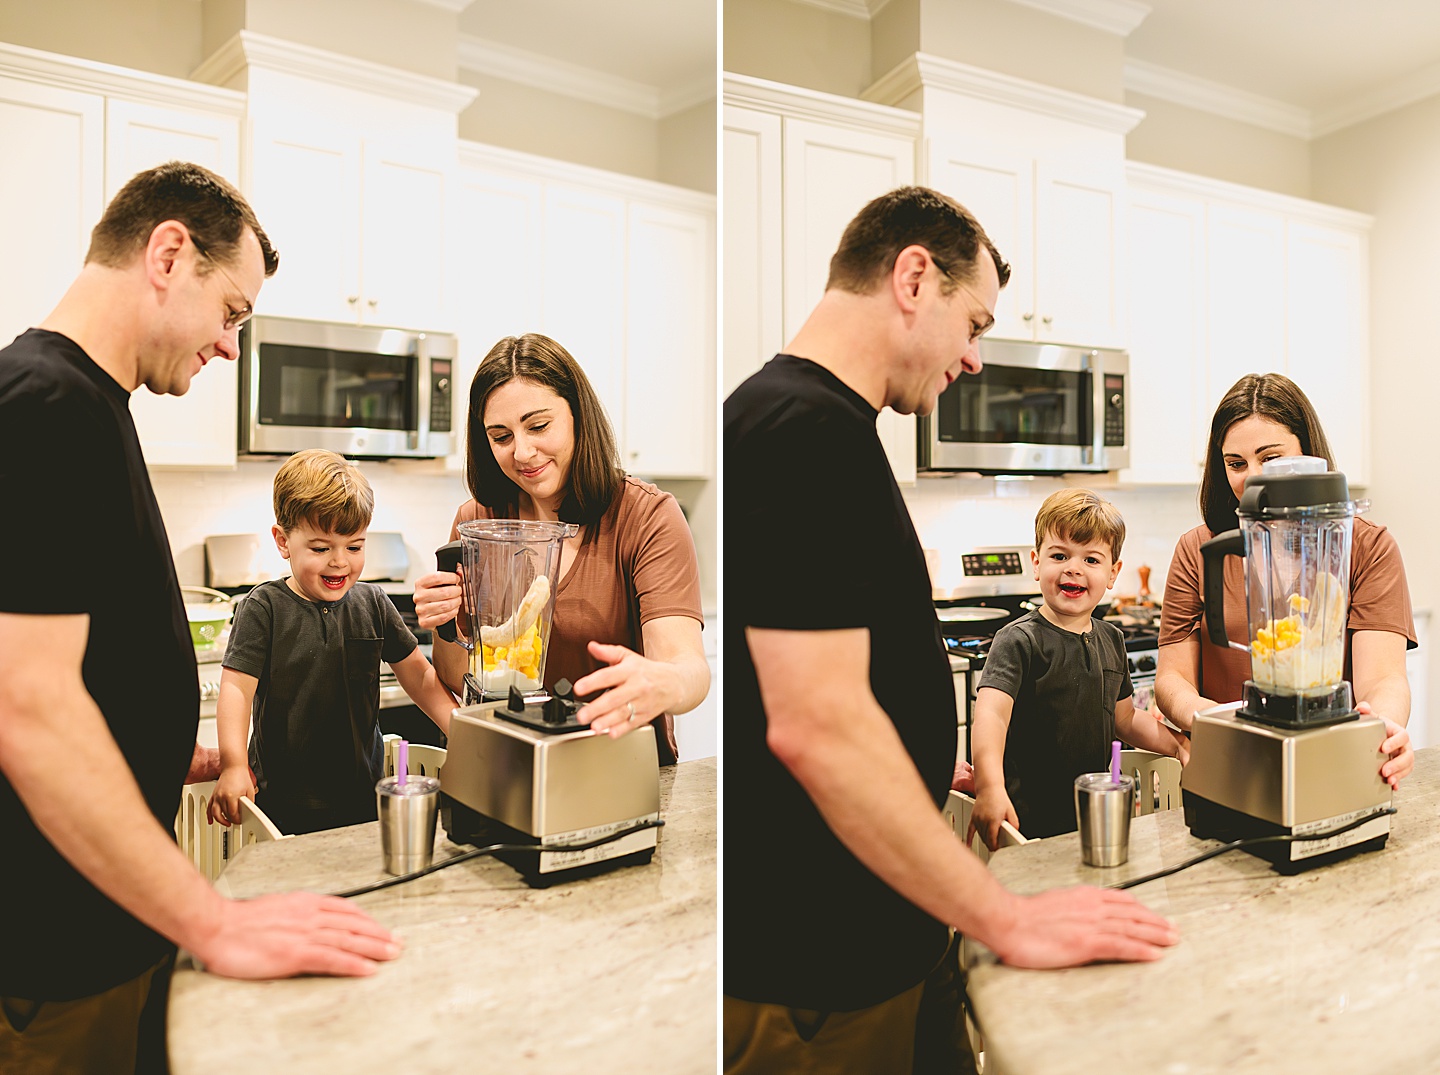 Kid making a smoothie with his parents in the kitchen